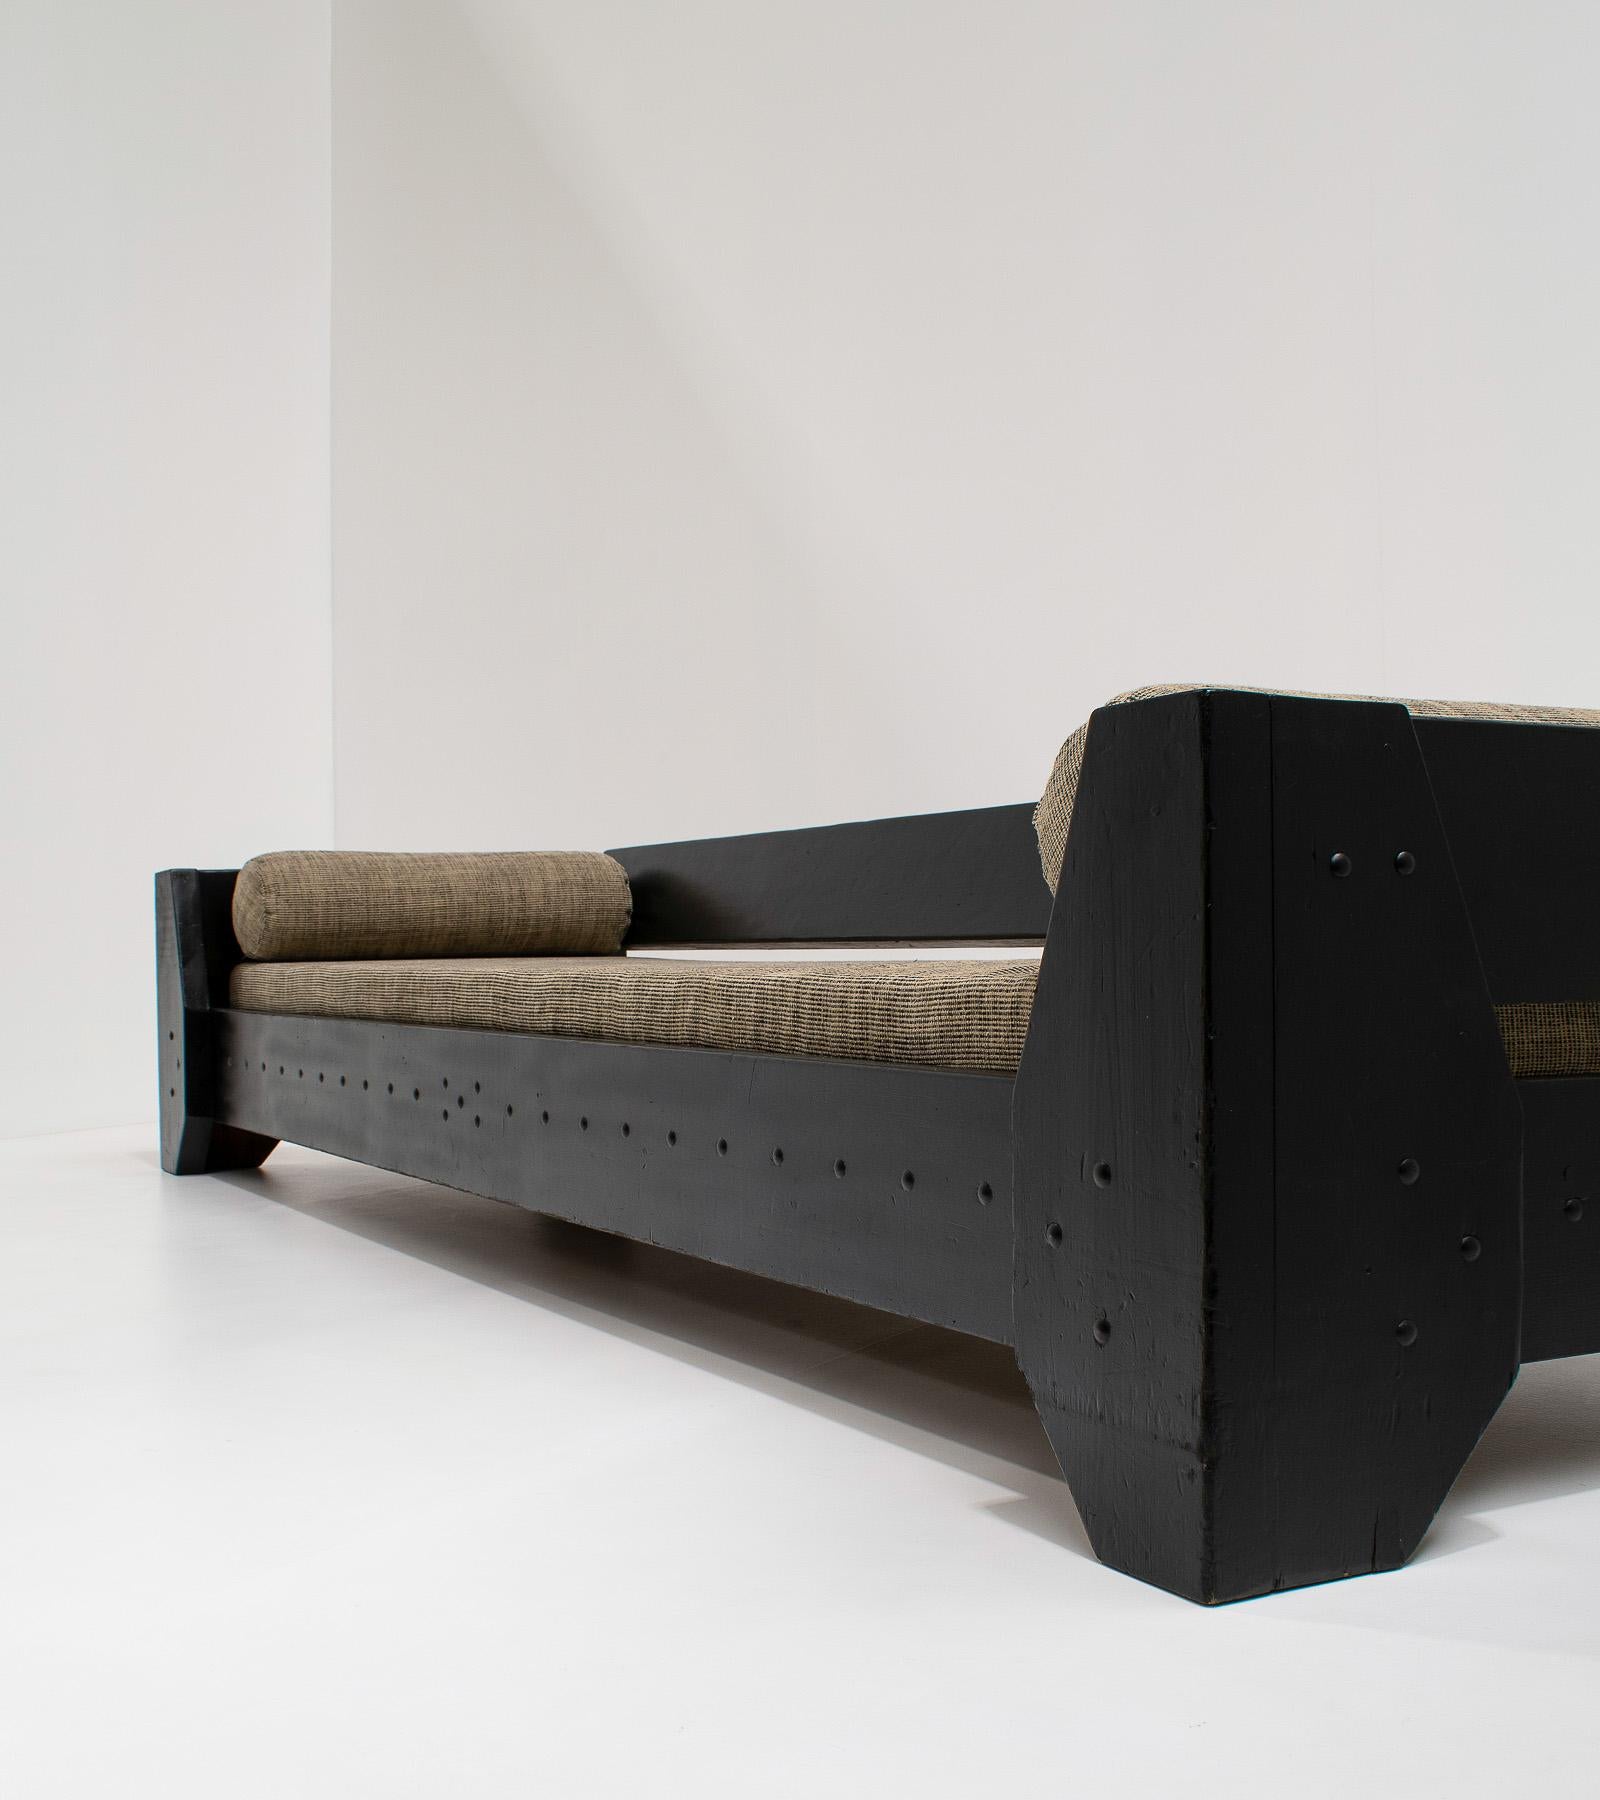 Mid-20th Century Dutch Modernist Sofa or Daybed, 1960s